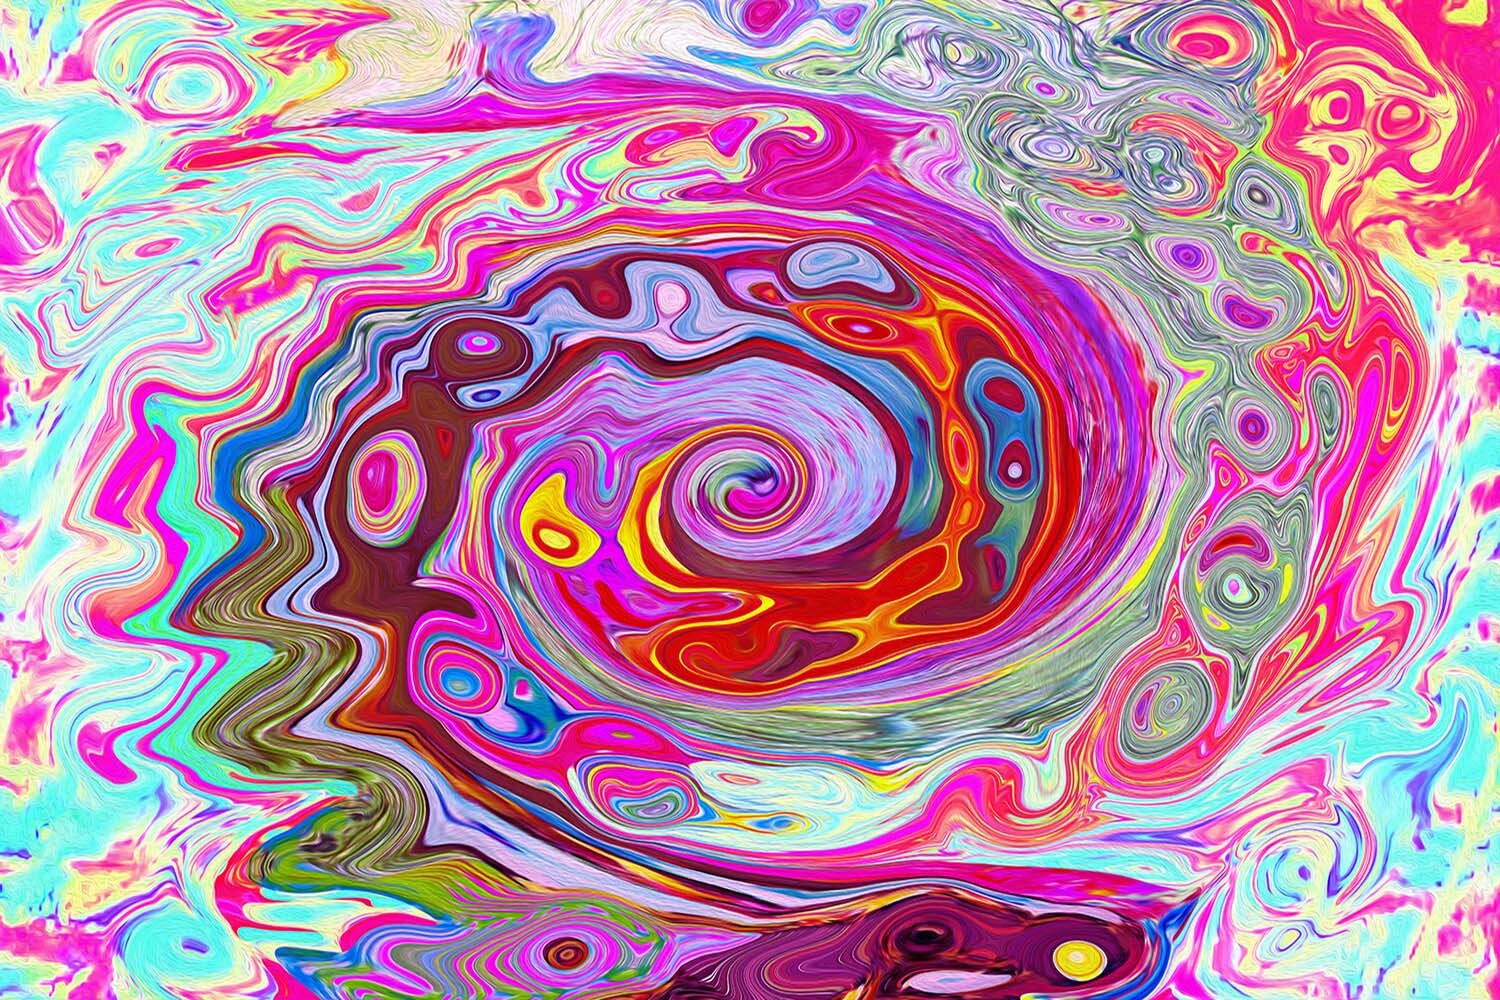 Groovy Abstract Retro Hot Pink and Blue Swirl